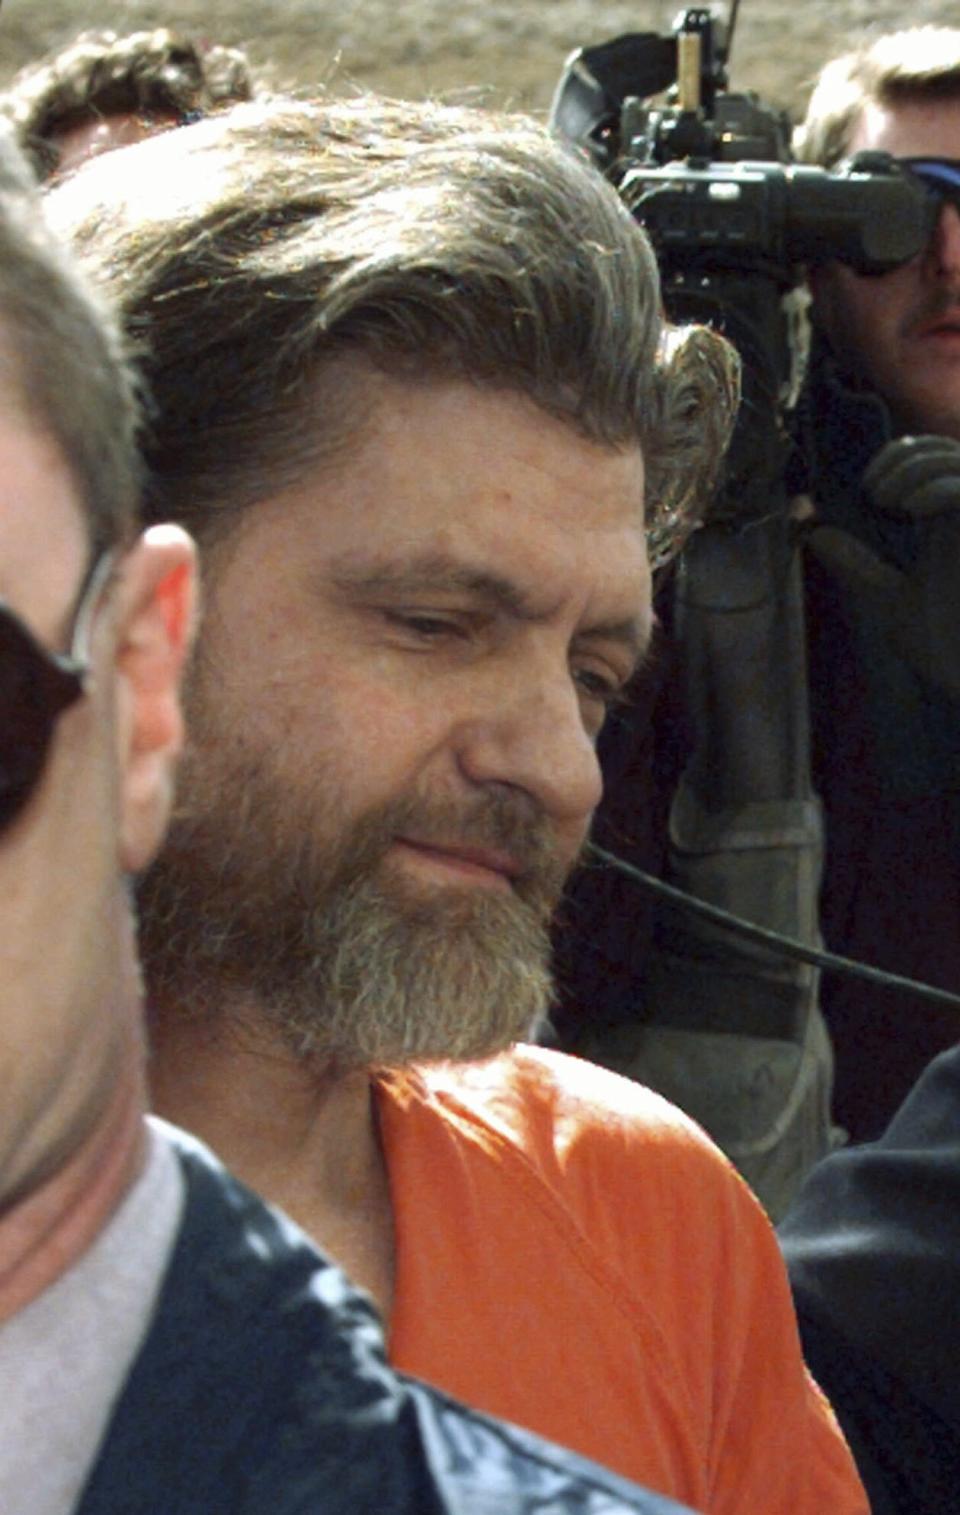 FILE - Theordore John Kaczynski, the suspected Unabomber, is led into the federal courthouse in Helena, Mont., Thursday, April 4, 1996, to face a charge of possession of bomb components. Kaczynski, known as the “Unabomber,” has died in federal prison, a spokesperson for the Bureau of Prisons told The Associated Press on Saturday, June 10, 2023. (AP Photo/Elaine Thompson, File)